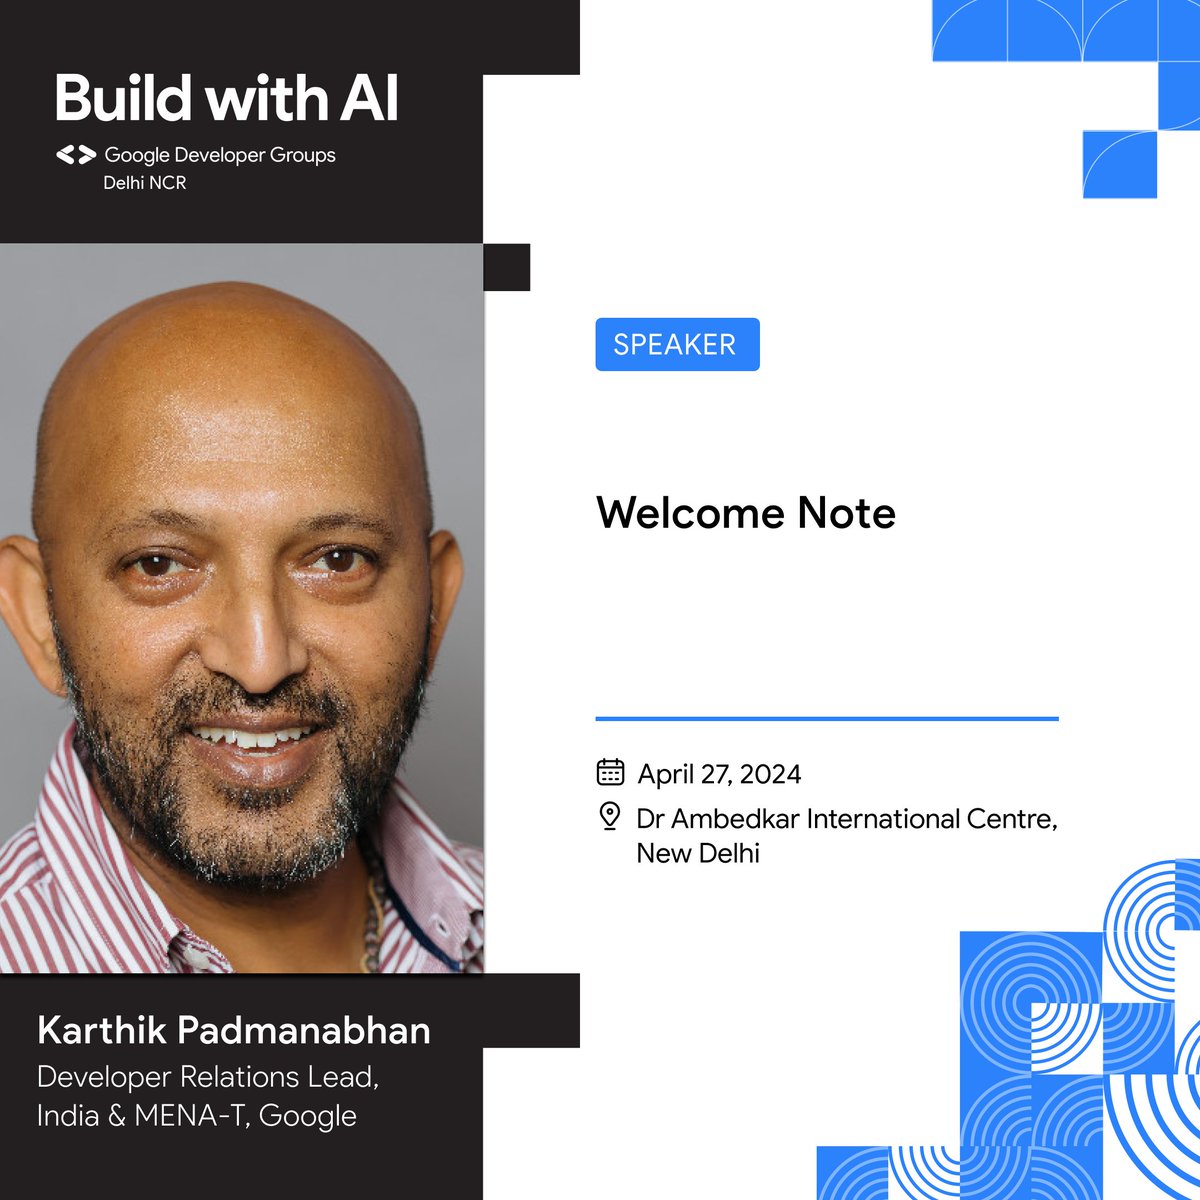 Delhi, get hyped! 🔥 @karthik_padman, Google's Dev Relations Lead for India & MENA-T, is kicking off our AI extravaganza with the Opening Keynote! Get those minds ready to be blown as he lays the foundation for the insane knowledge that's coming your way. 🧠💥